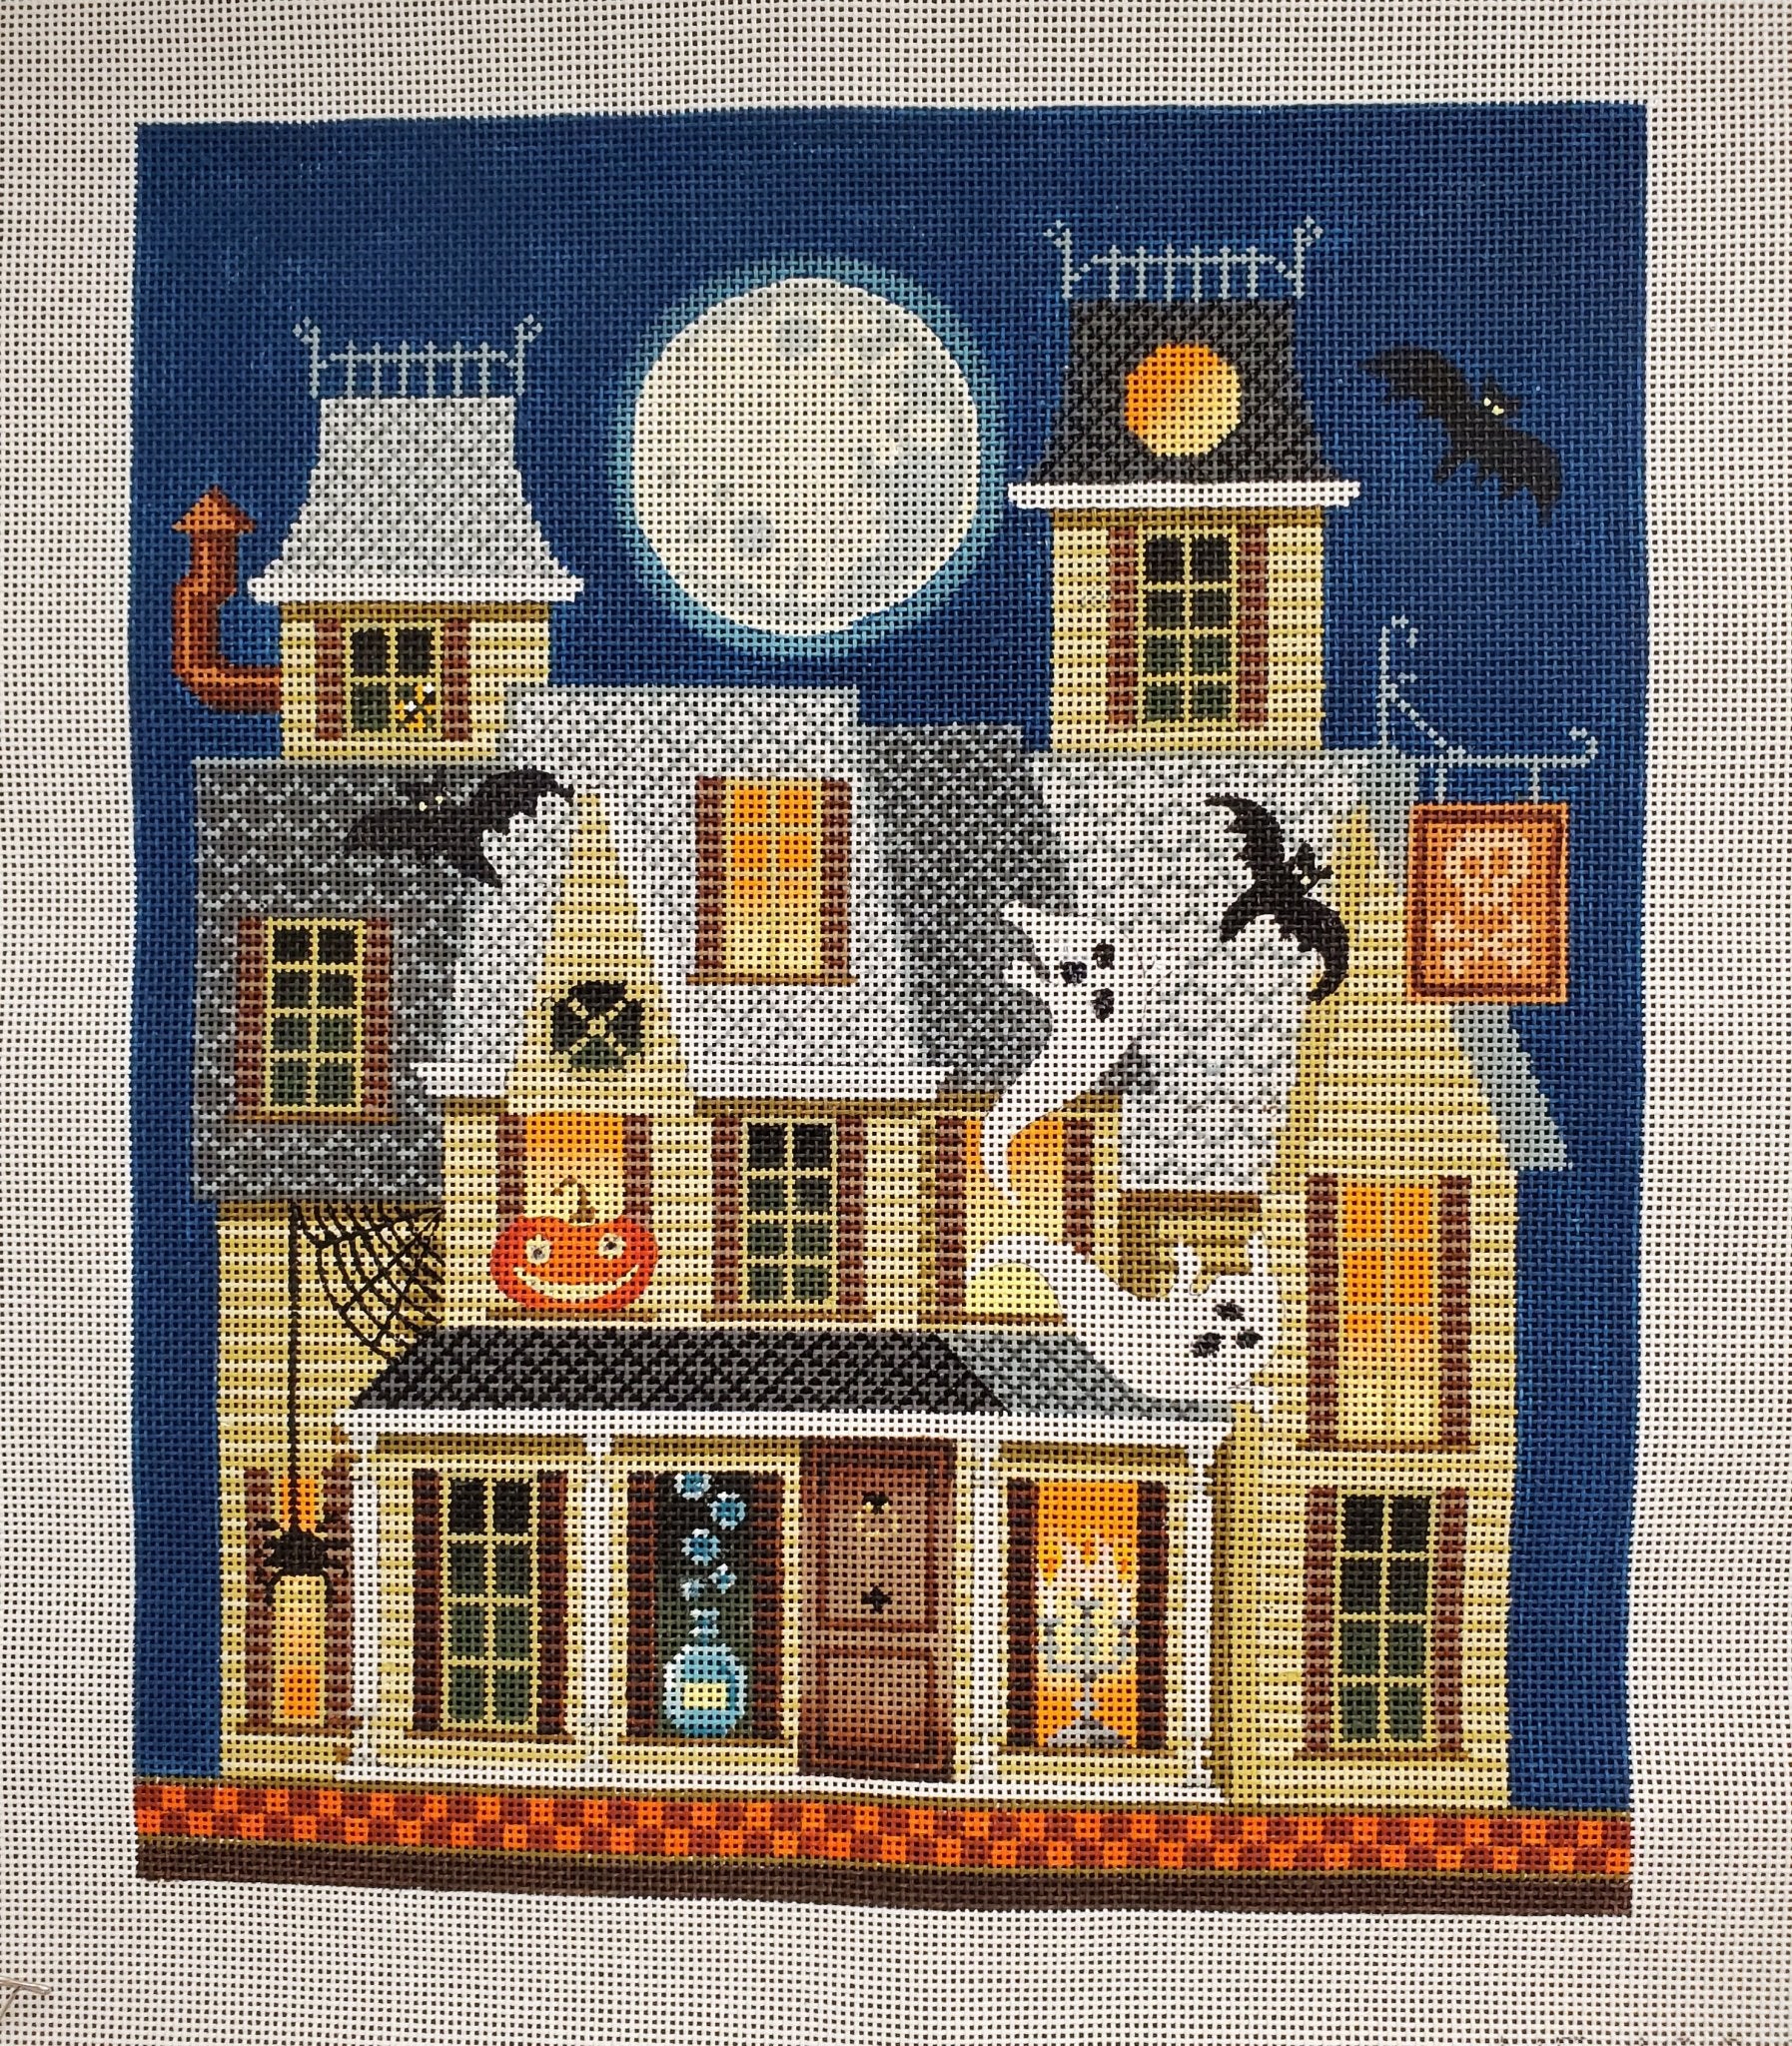 Halloween House with 10 Windows - The Flying Needles